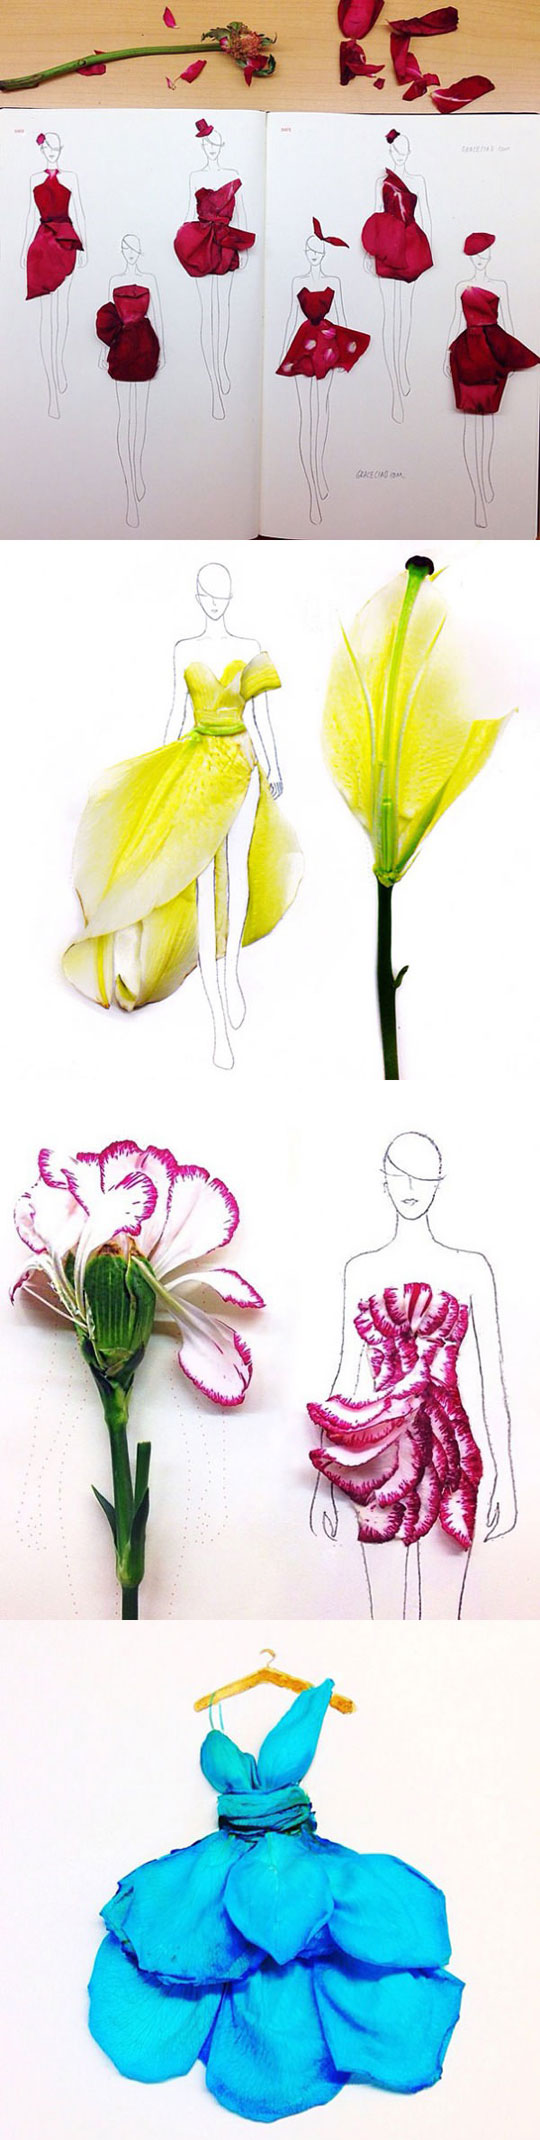 Fashion Illustrations With Real Flower Petals As Clothing